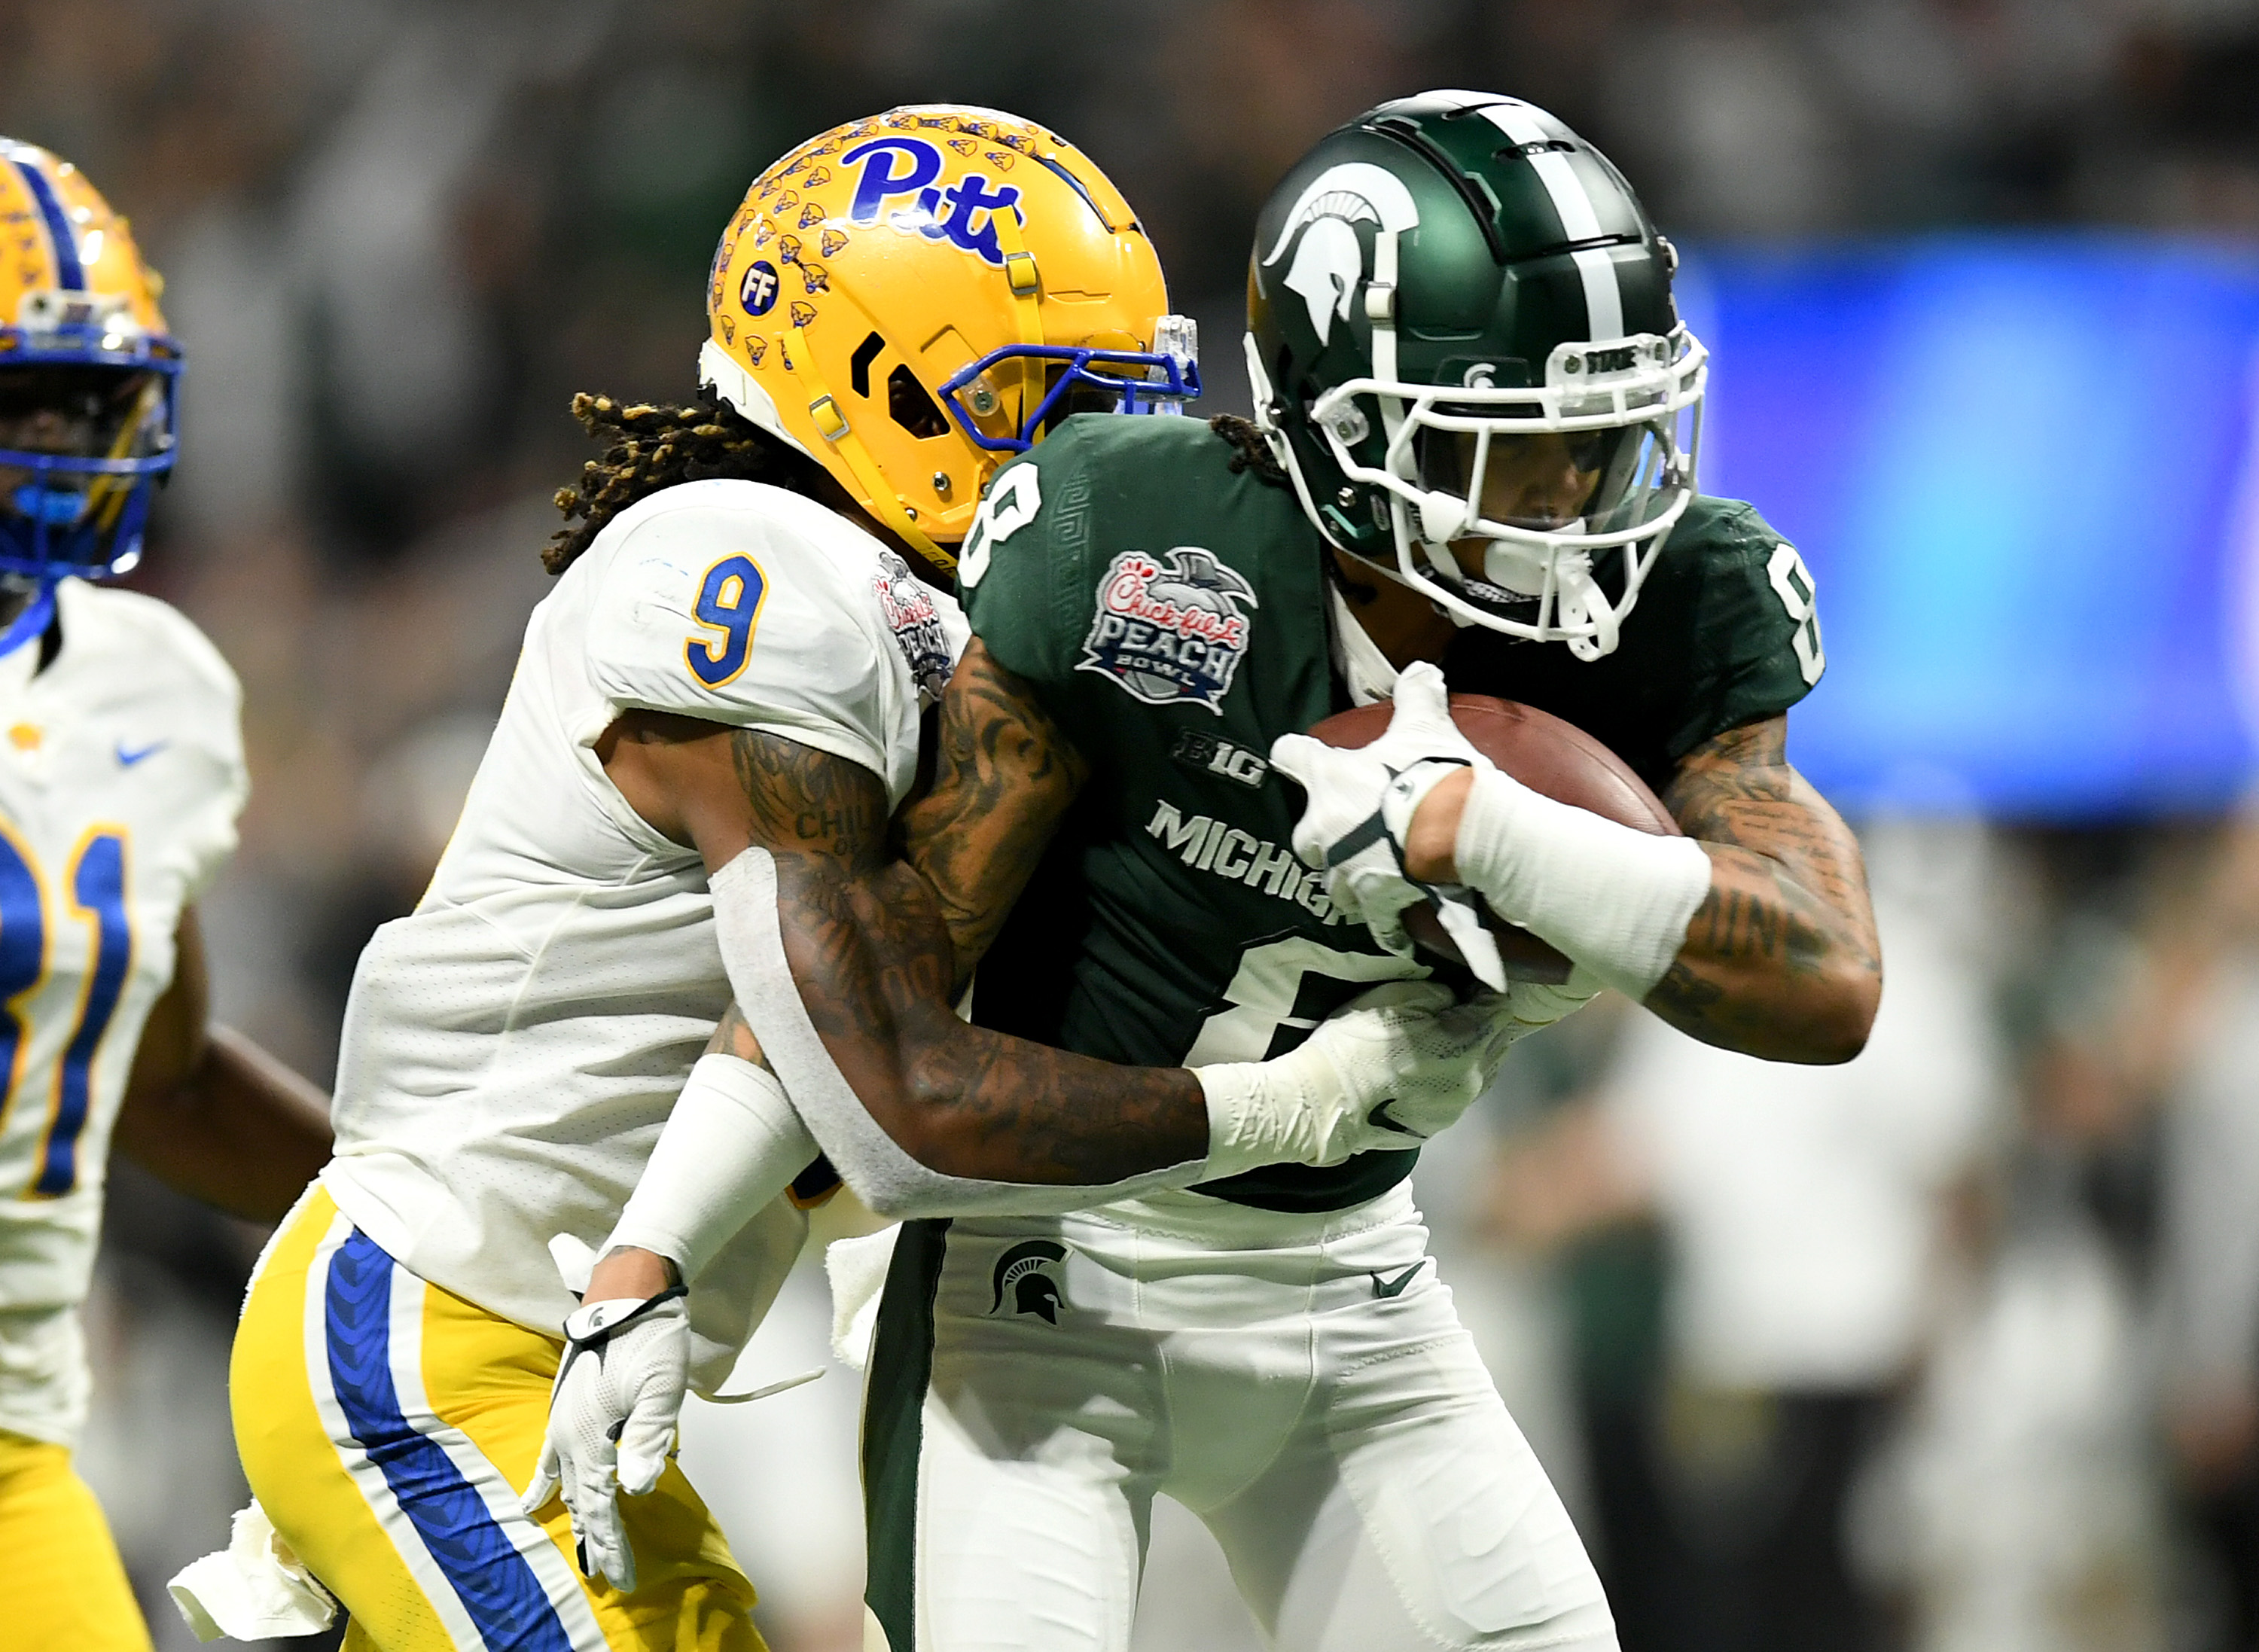 Michigan State Spartans 2022 Football Schedule Here Is Michigan State Football's New 2022 Schedule, With Michigan Game In  Ann Arbor